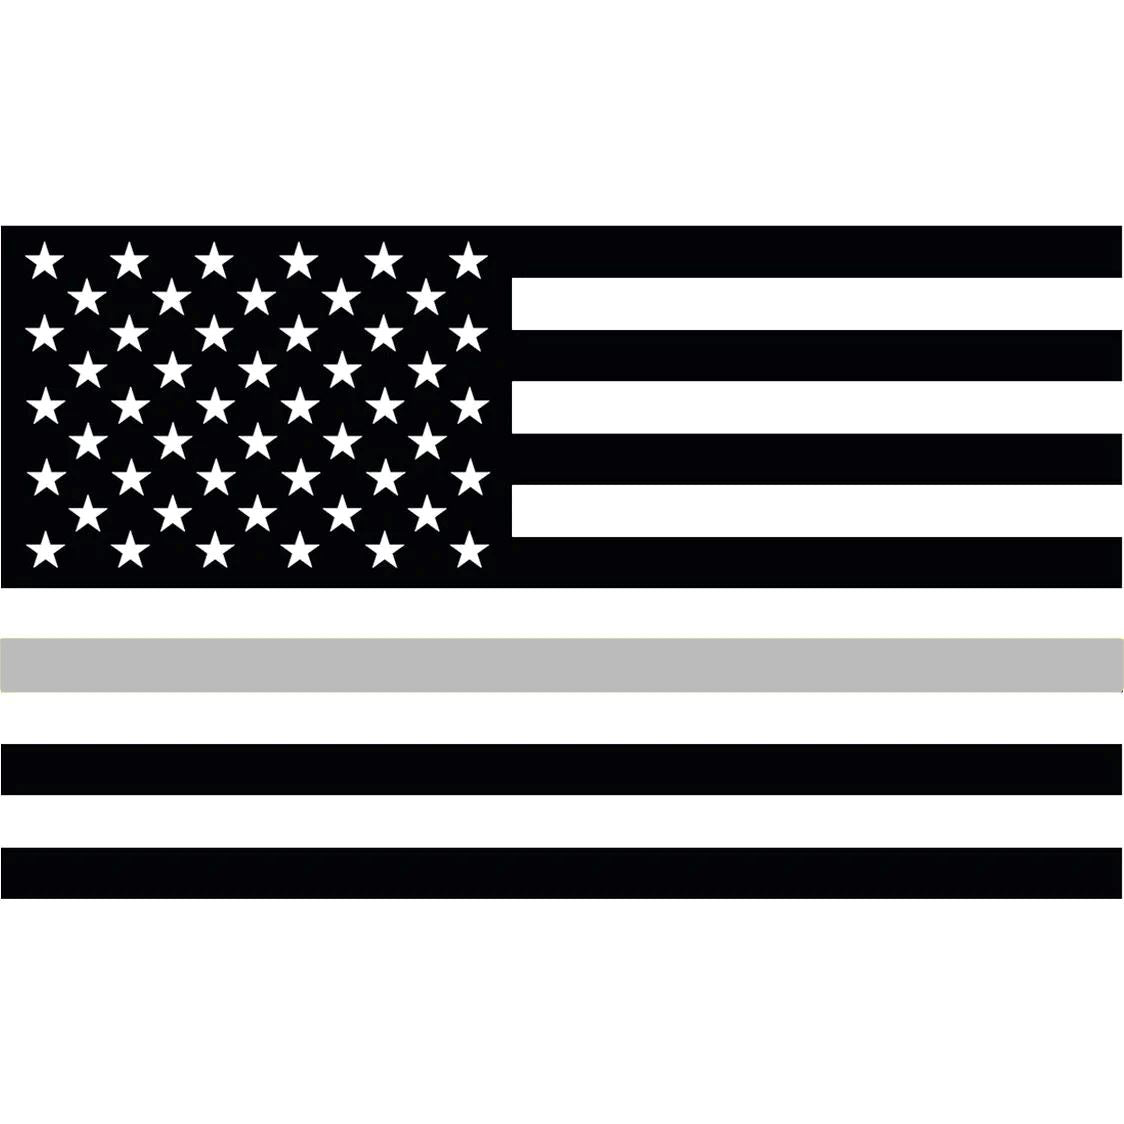 Thin Silver Line Flag Decal Sticker - Corrections Officer More Blue Life Apparel 